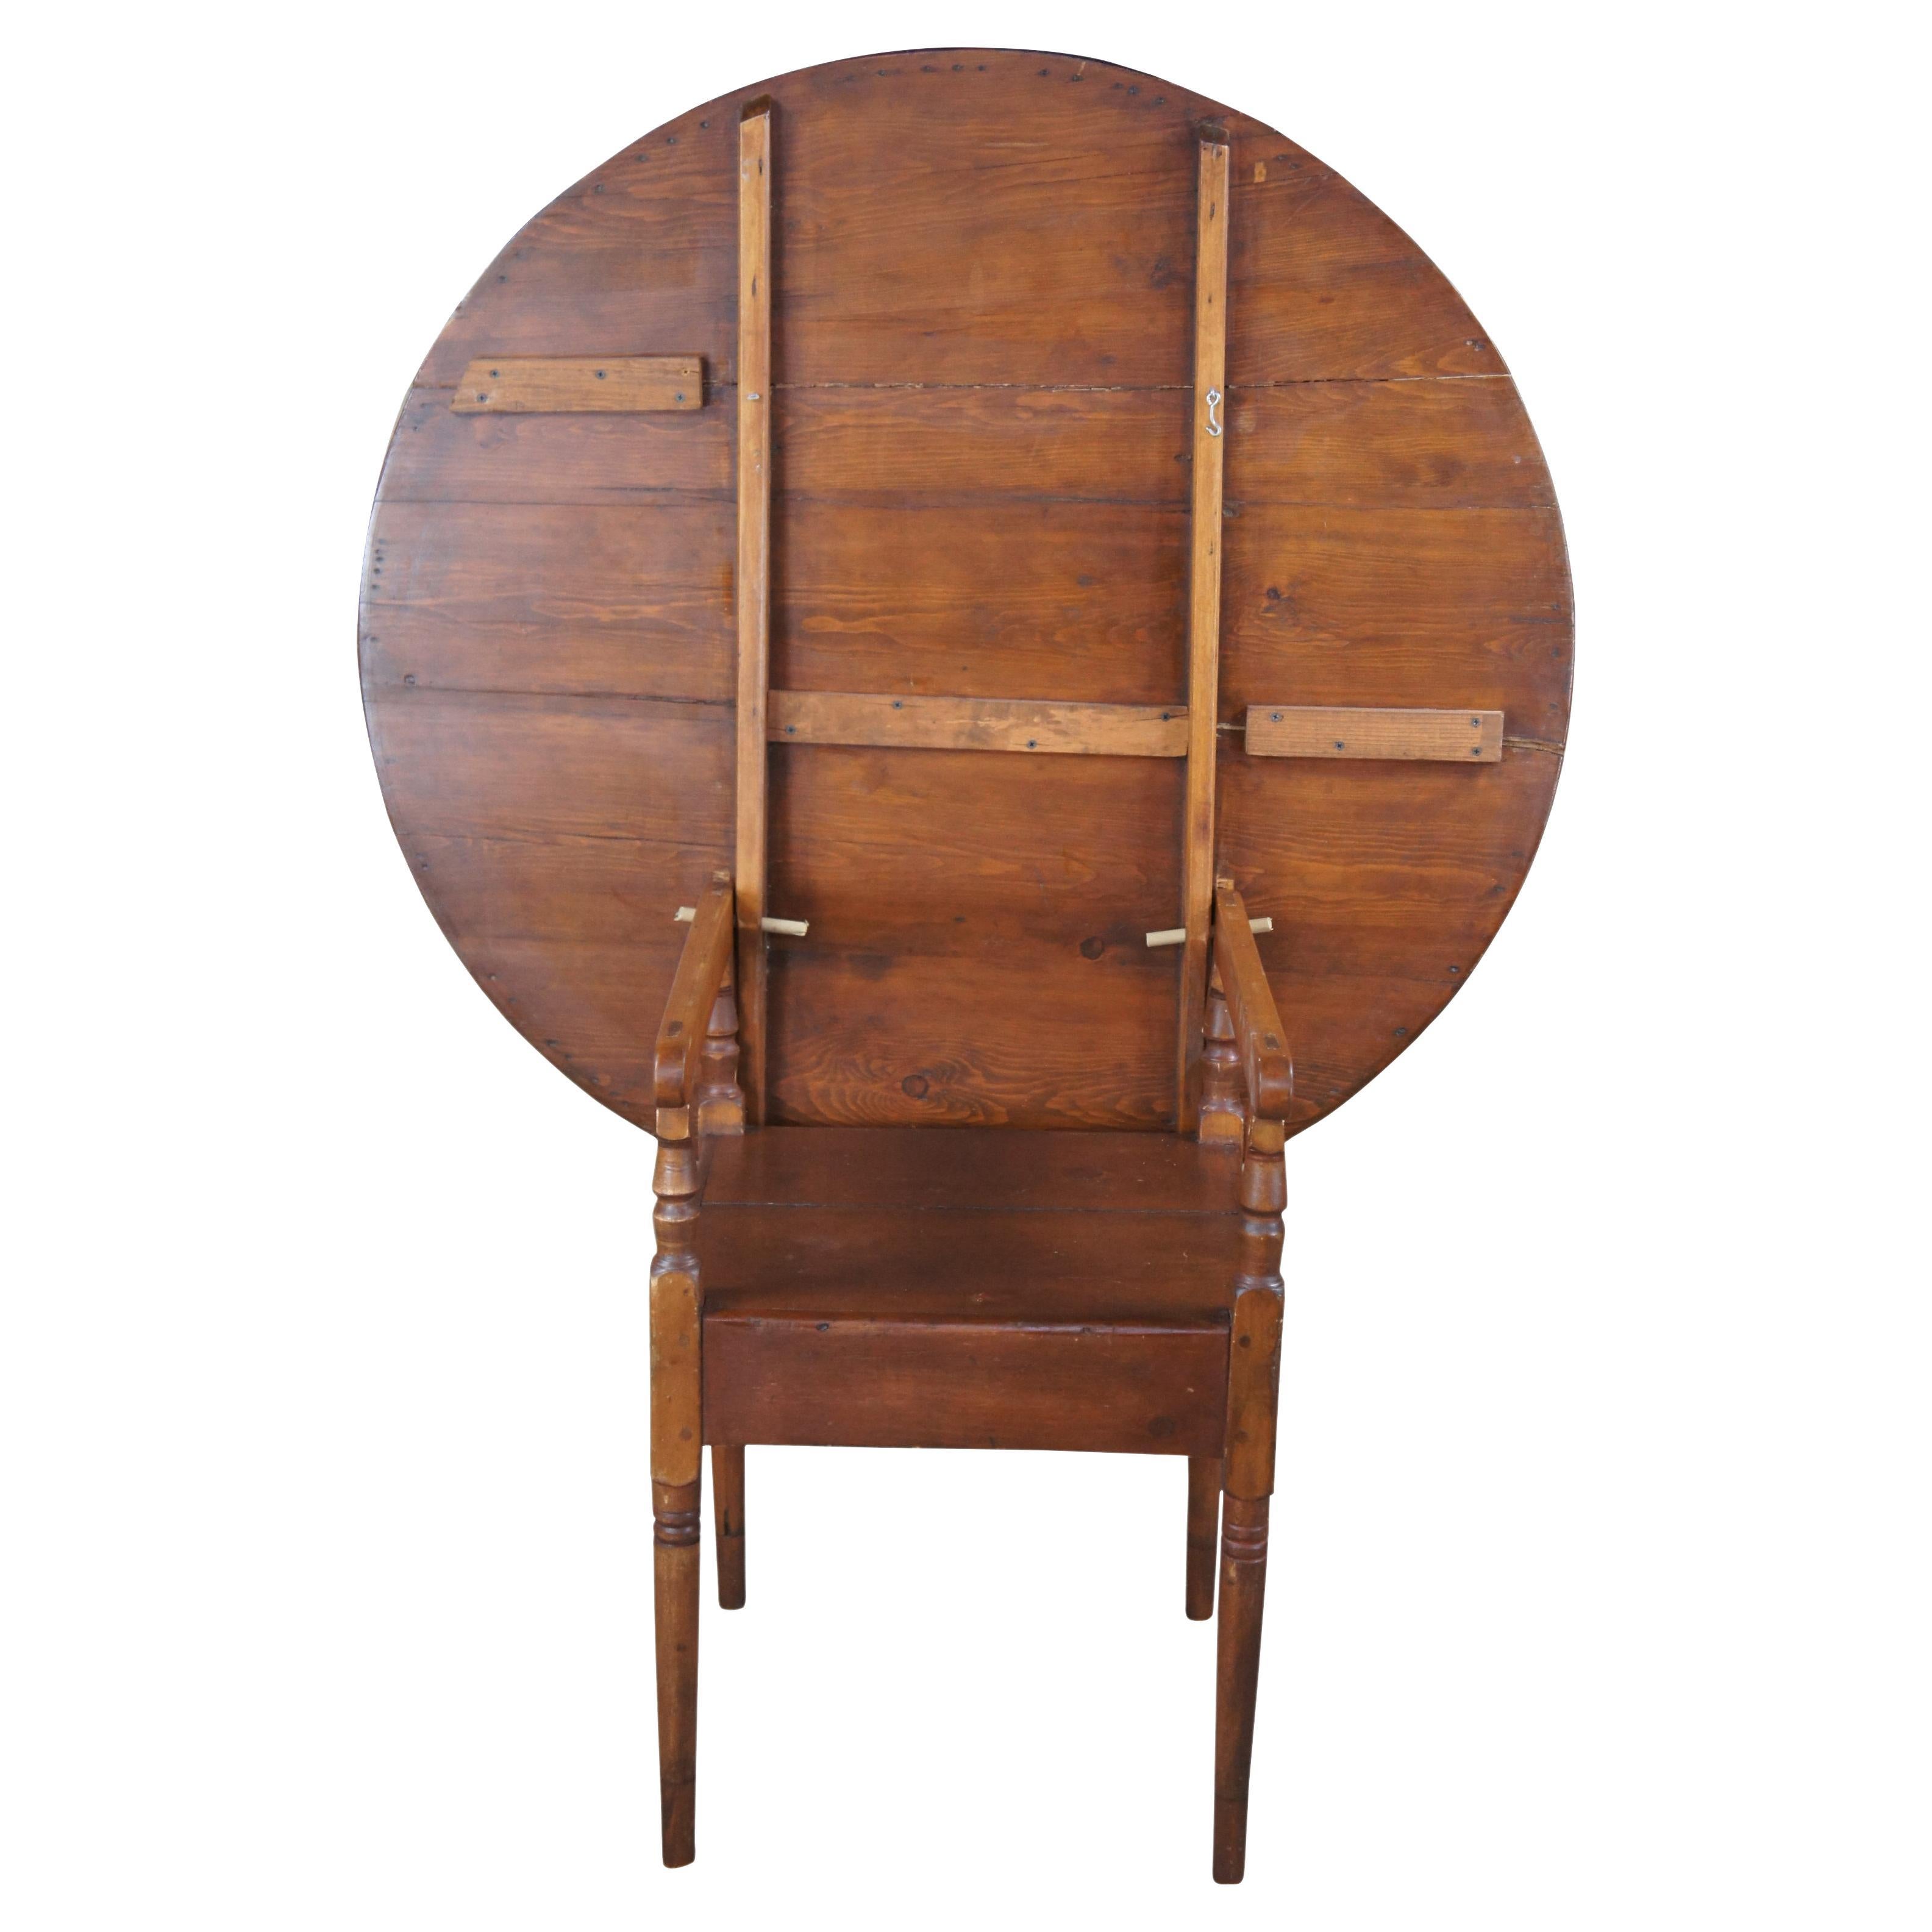 The term hutch table took form in the early 18th century when it was important to maximize storage and space. The combination of a table and a chest that could quickly be converted into a chair. This beautiful example comes to us from the first half